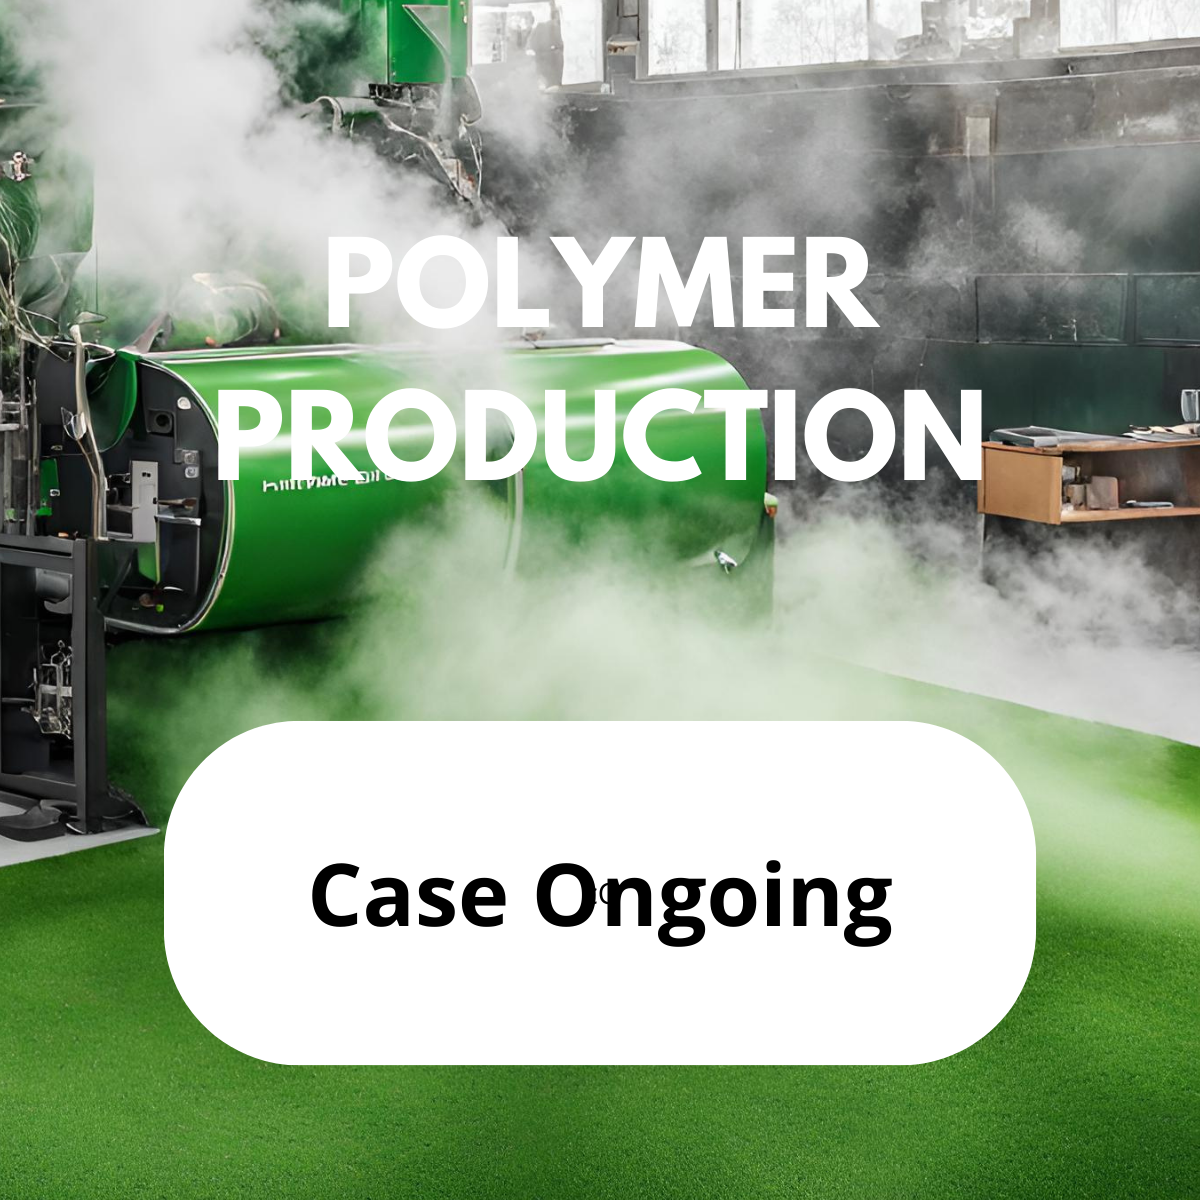 Polymer Production